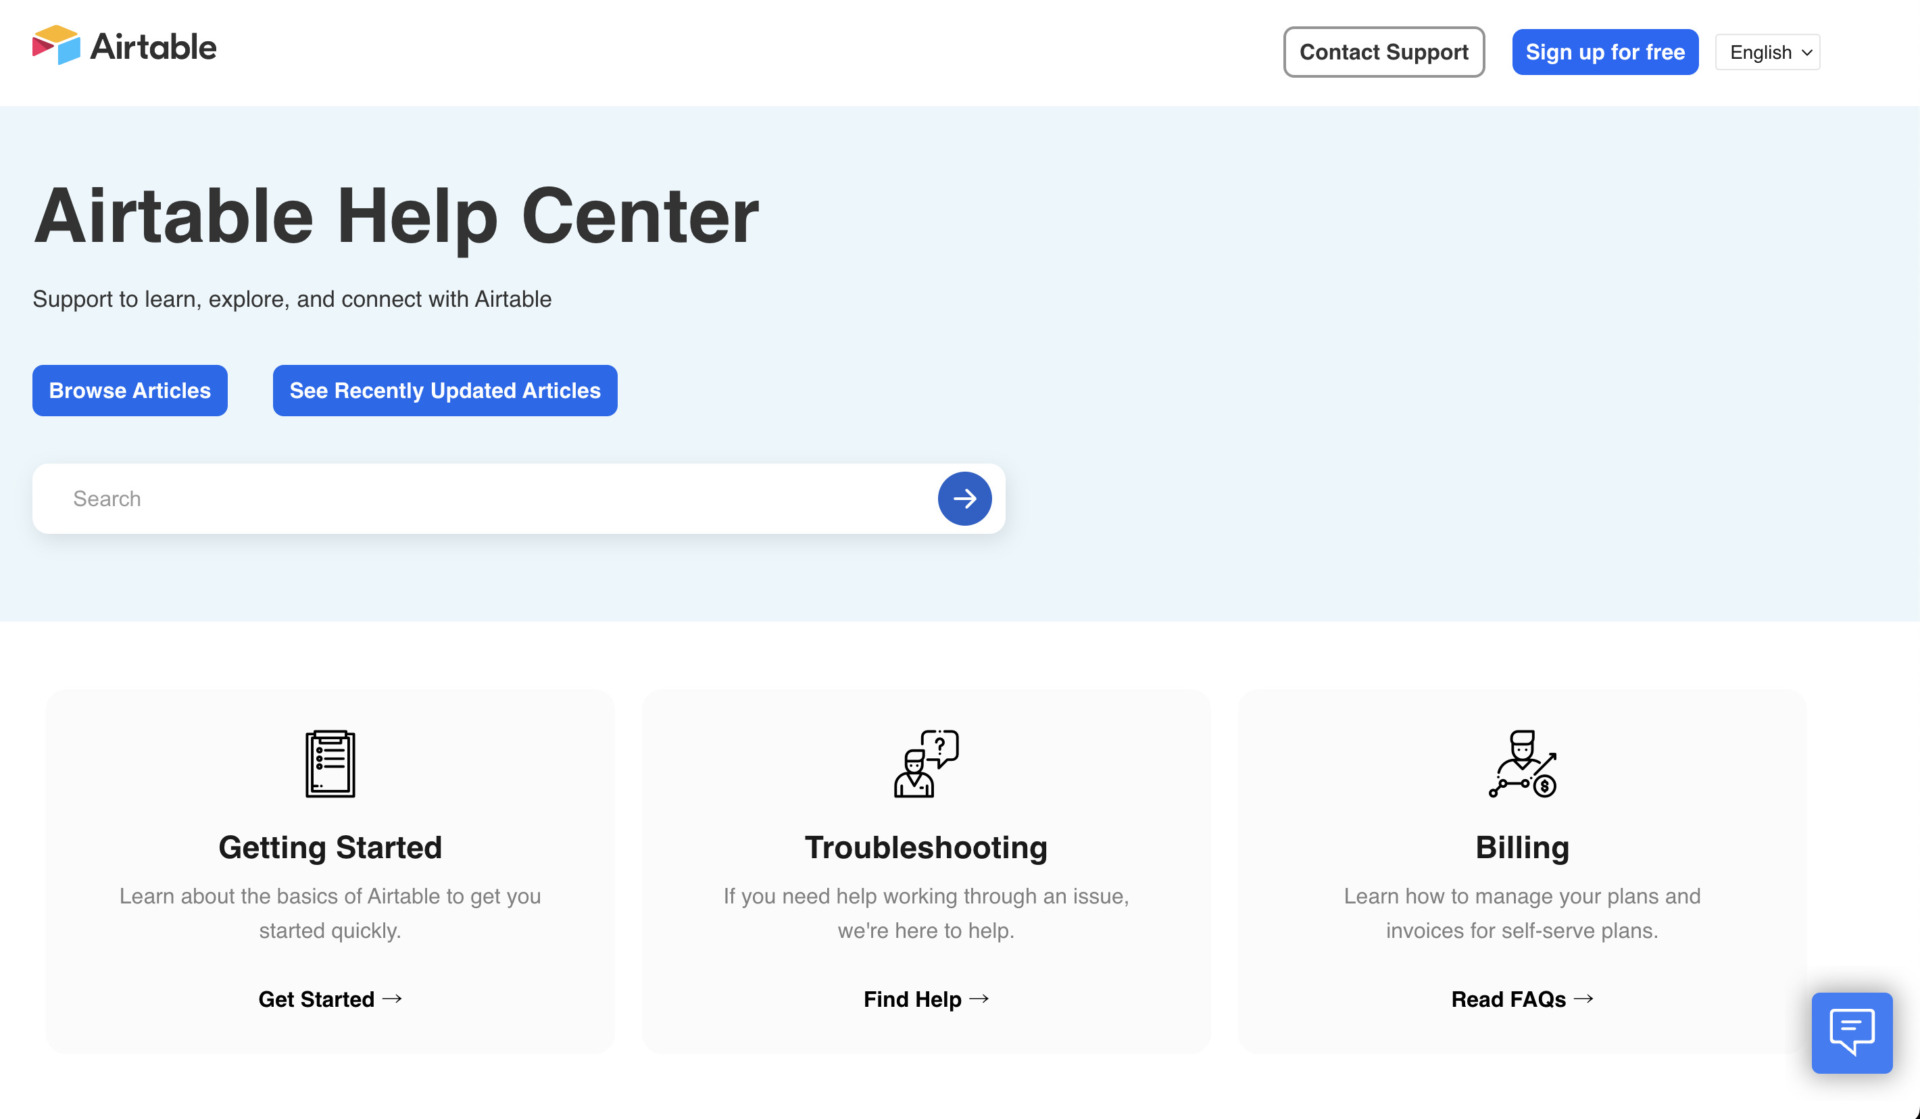 Top page of Airtable help center